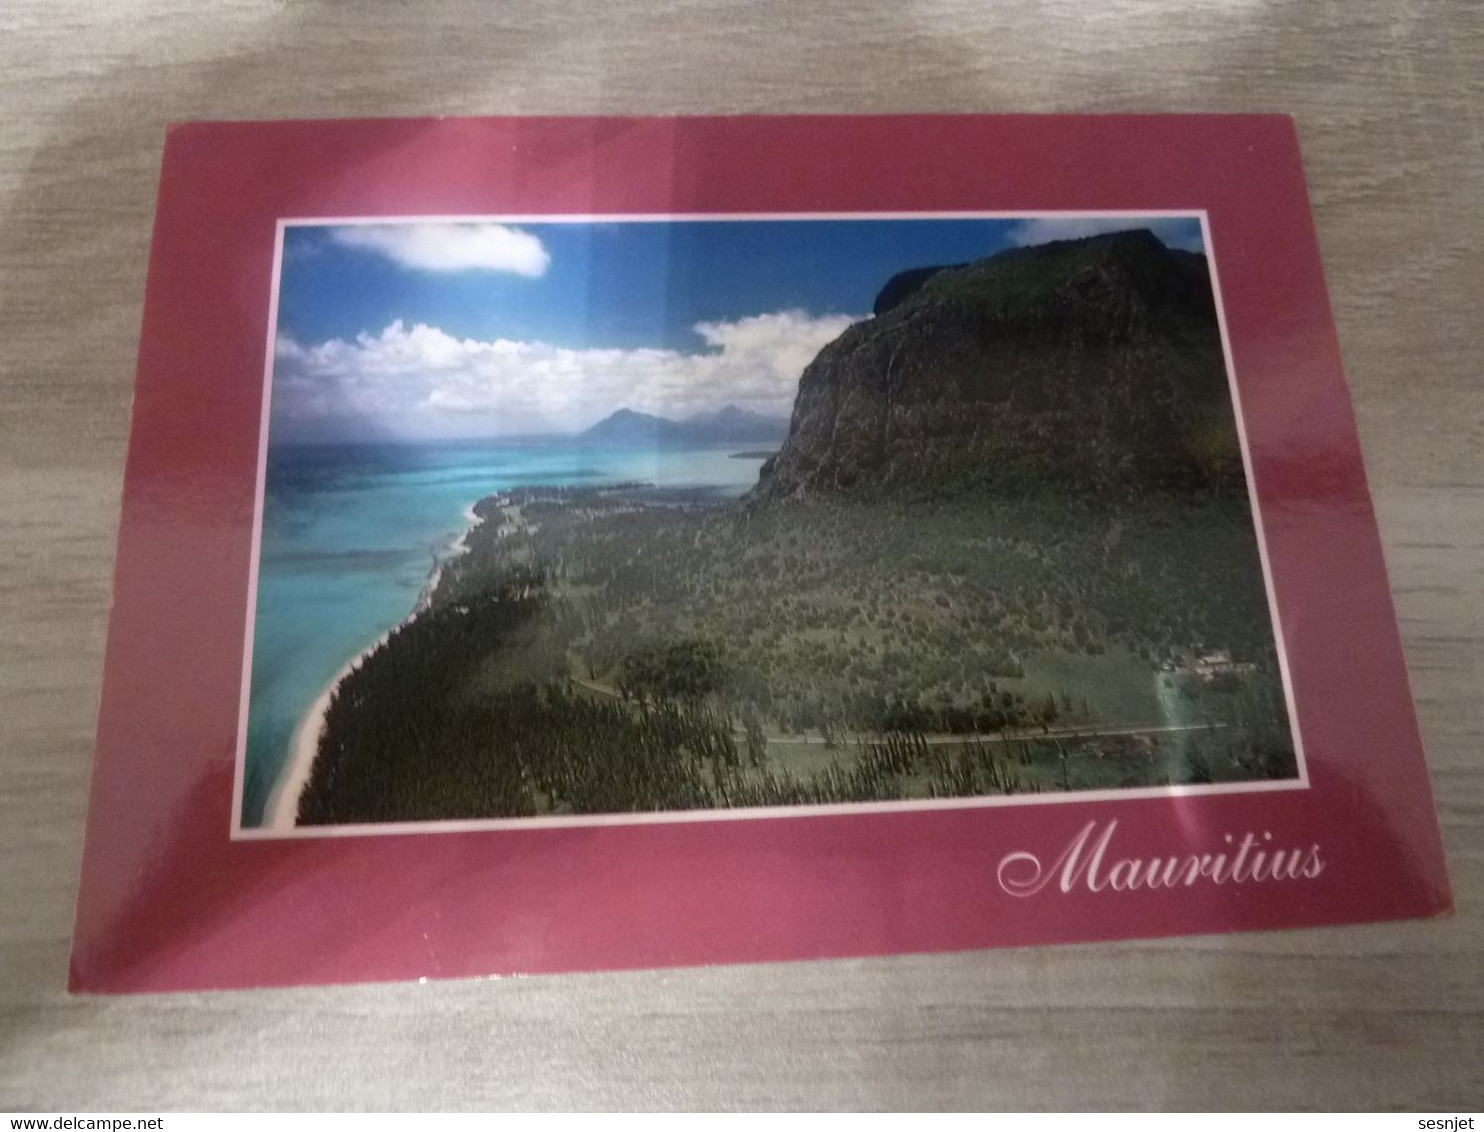 Ile Maurice - Le Morne - Grand Bay - Editions Arts Distributions - Année 1995 - - Maurice